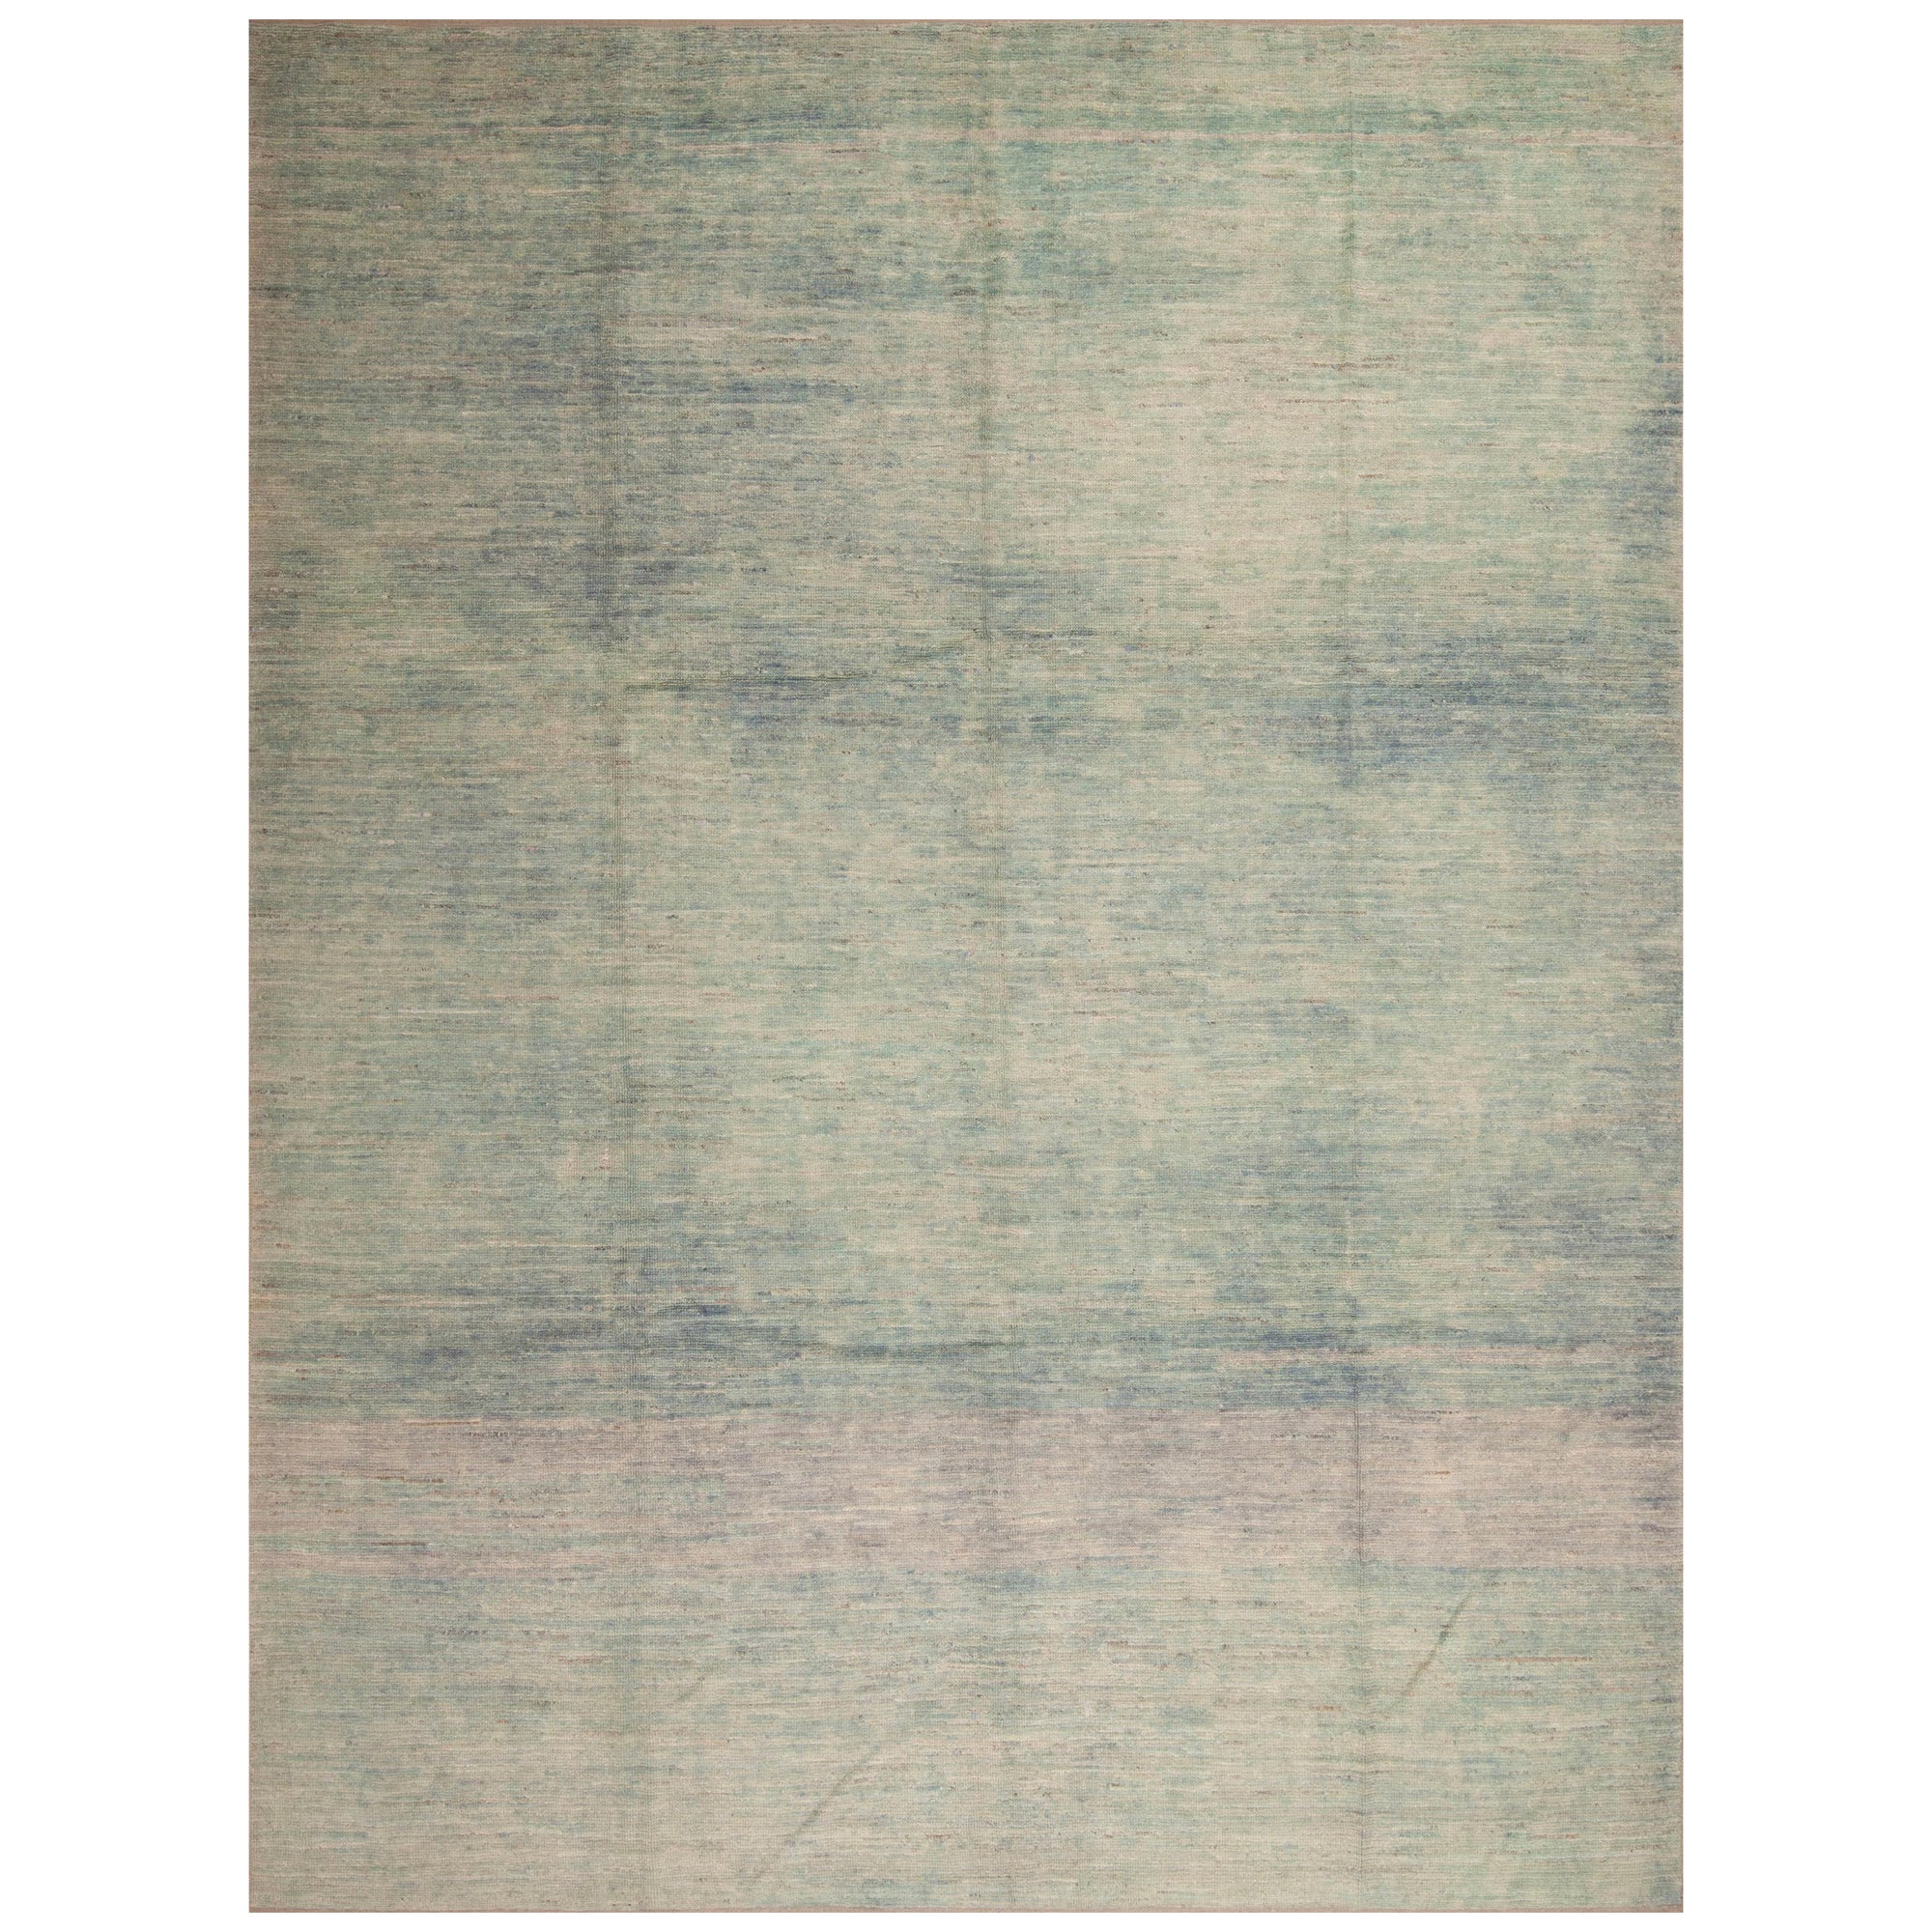 Nazmiyal Collection Green Seafoam Color Artistic Modern Room Size Rug 9'3" x 12' For Sale